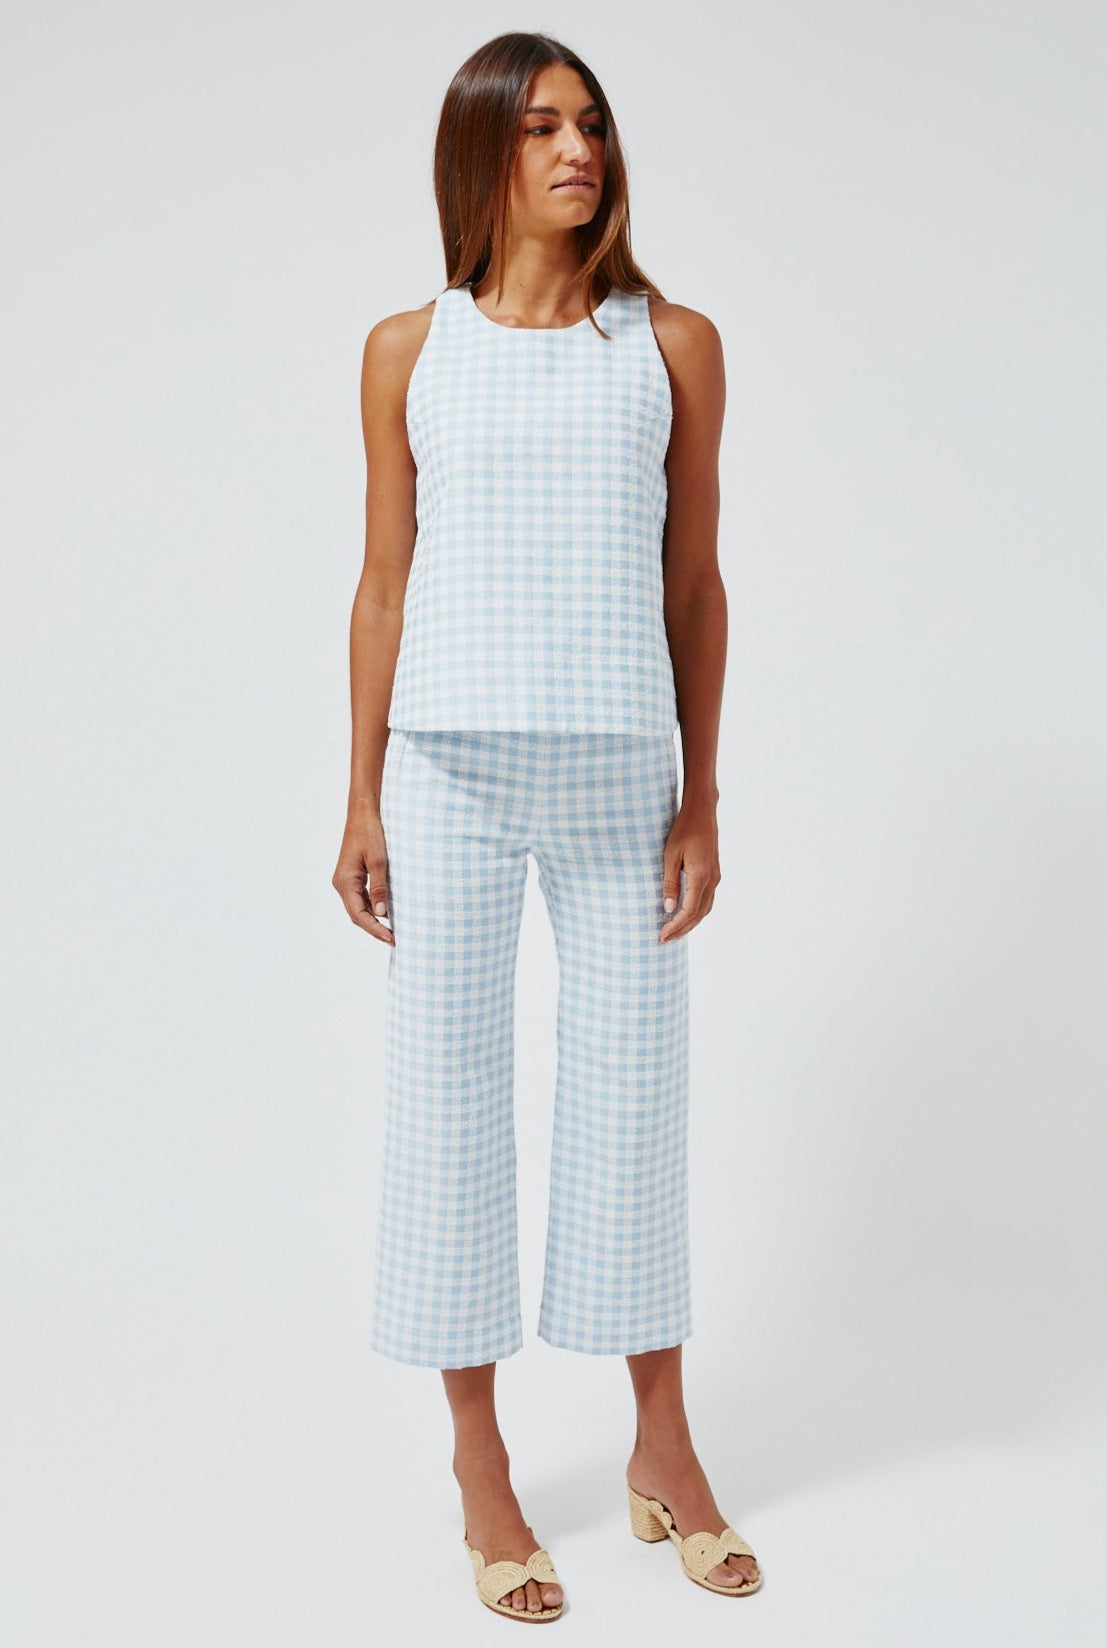 THE TRAPEZE TOP in VINTAGE BLUE GINGHAM BOUCLE COTTON